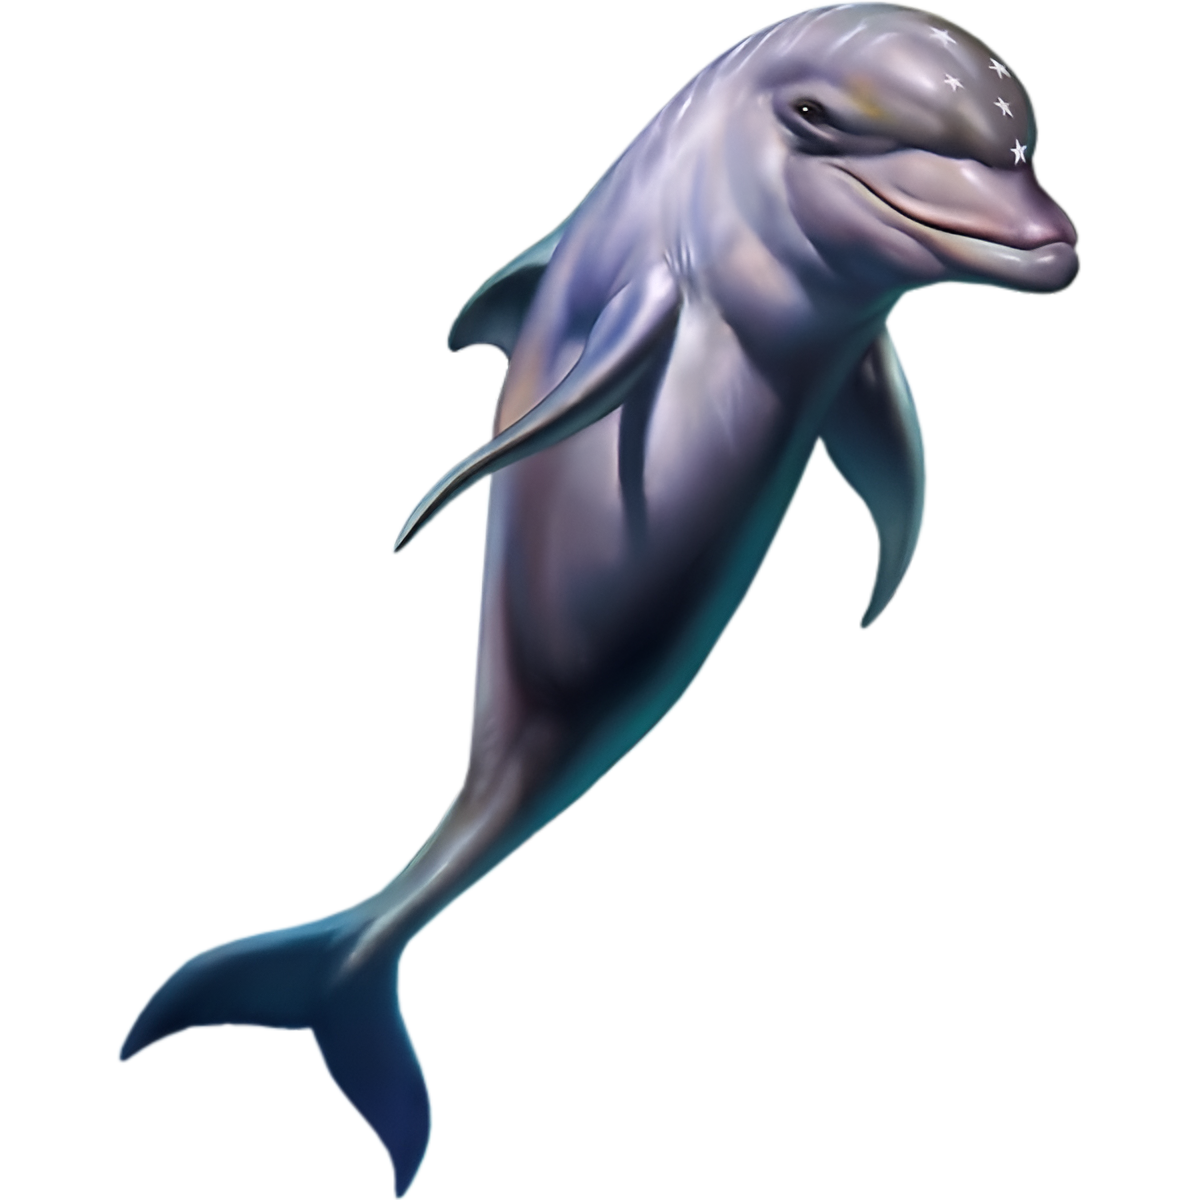 Ecco the Dolphin by Mentect on DeviantArt